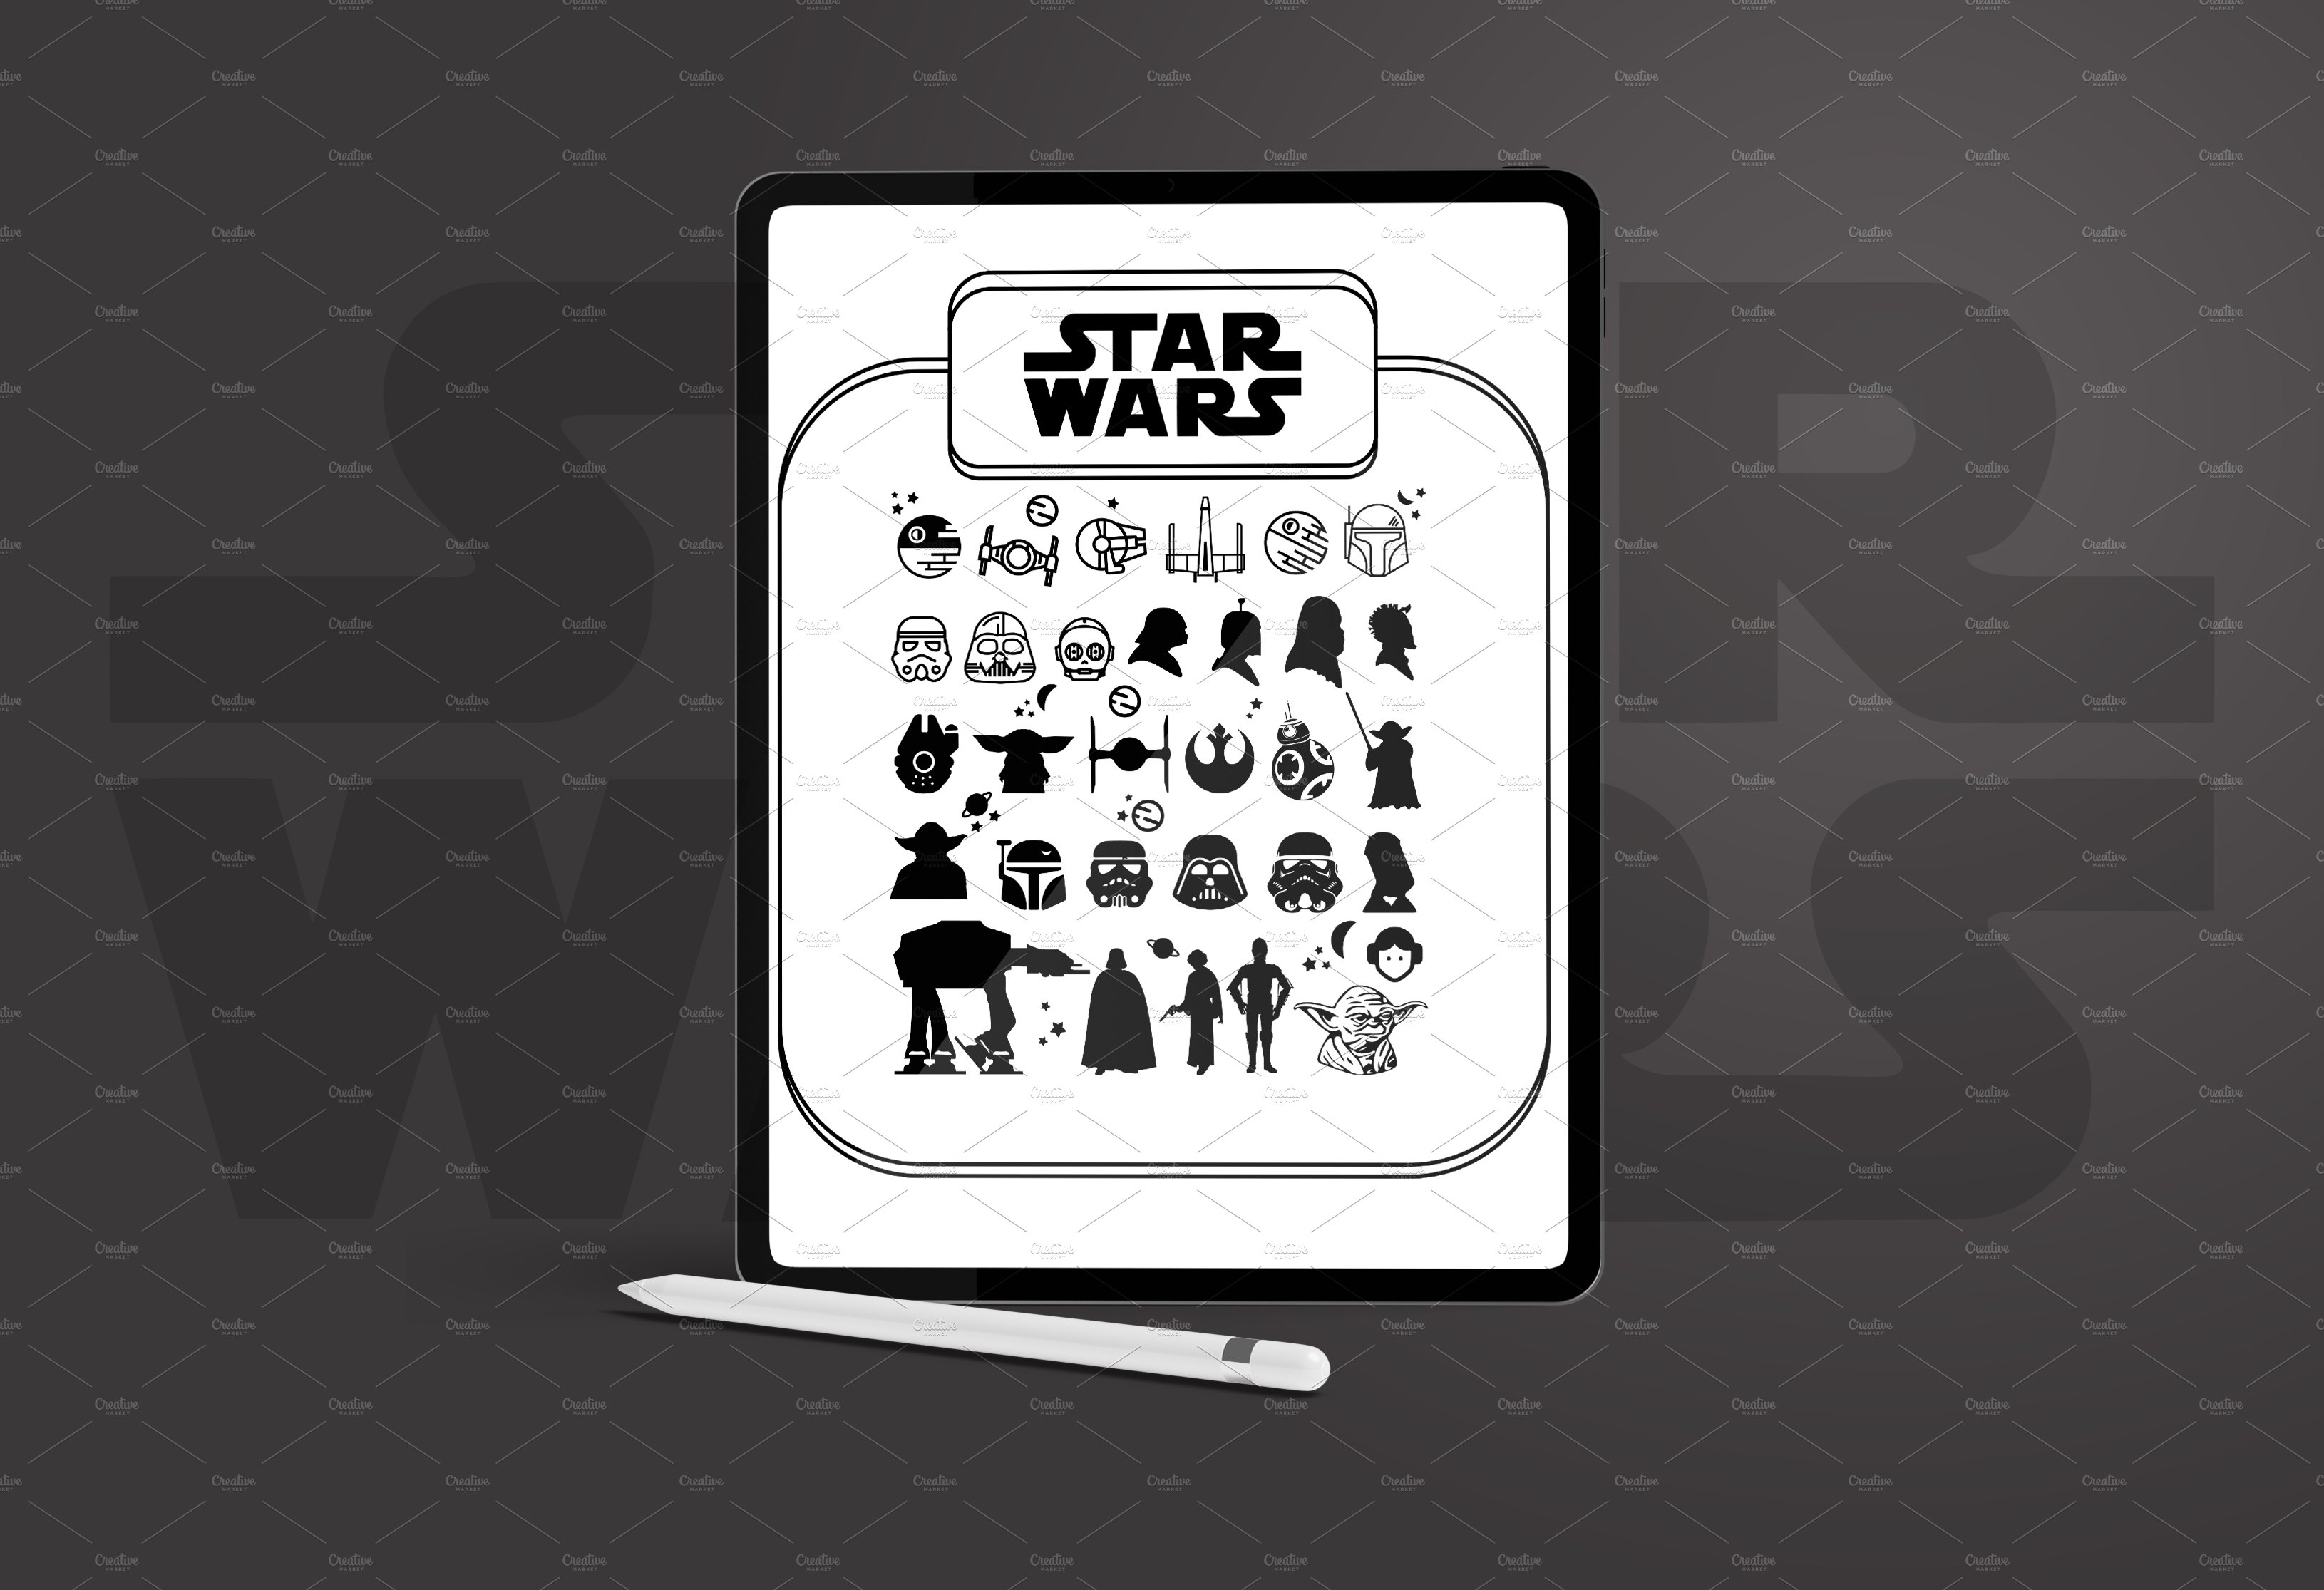 Star Wars ClipArt / Icons preview image.